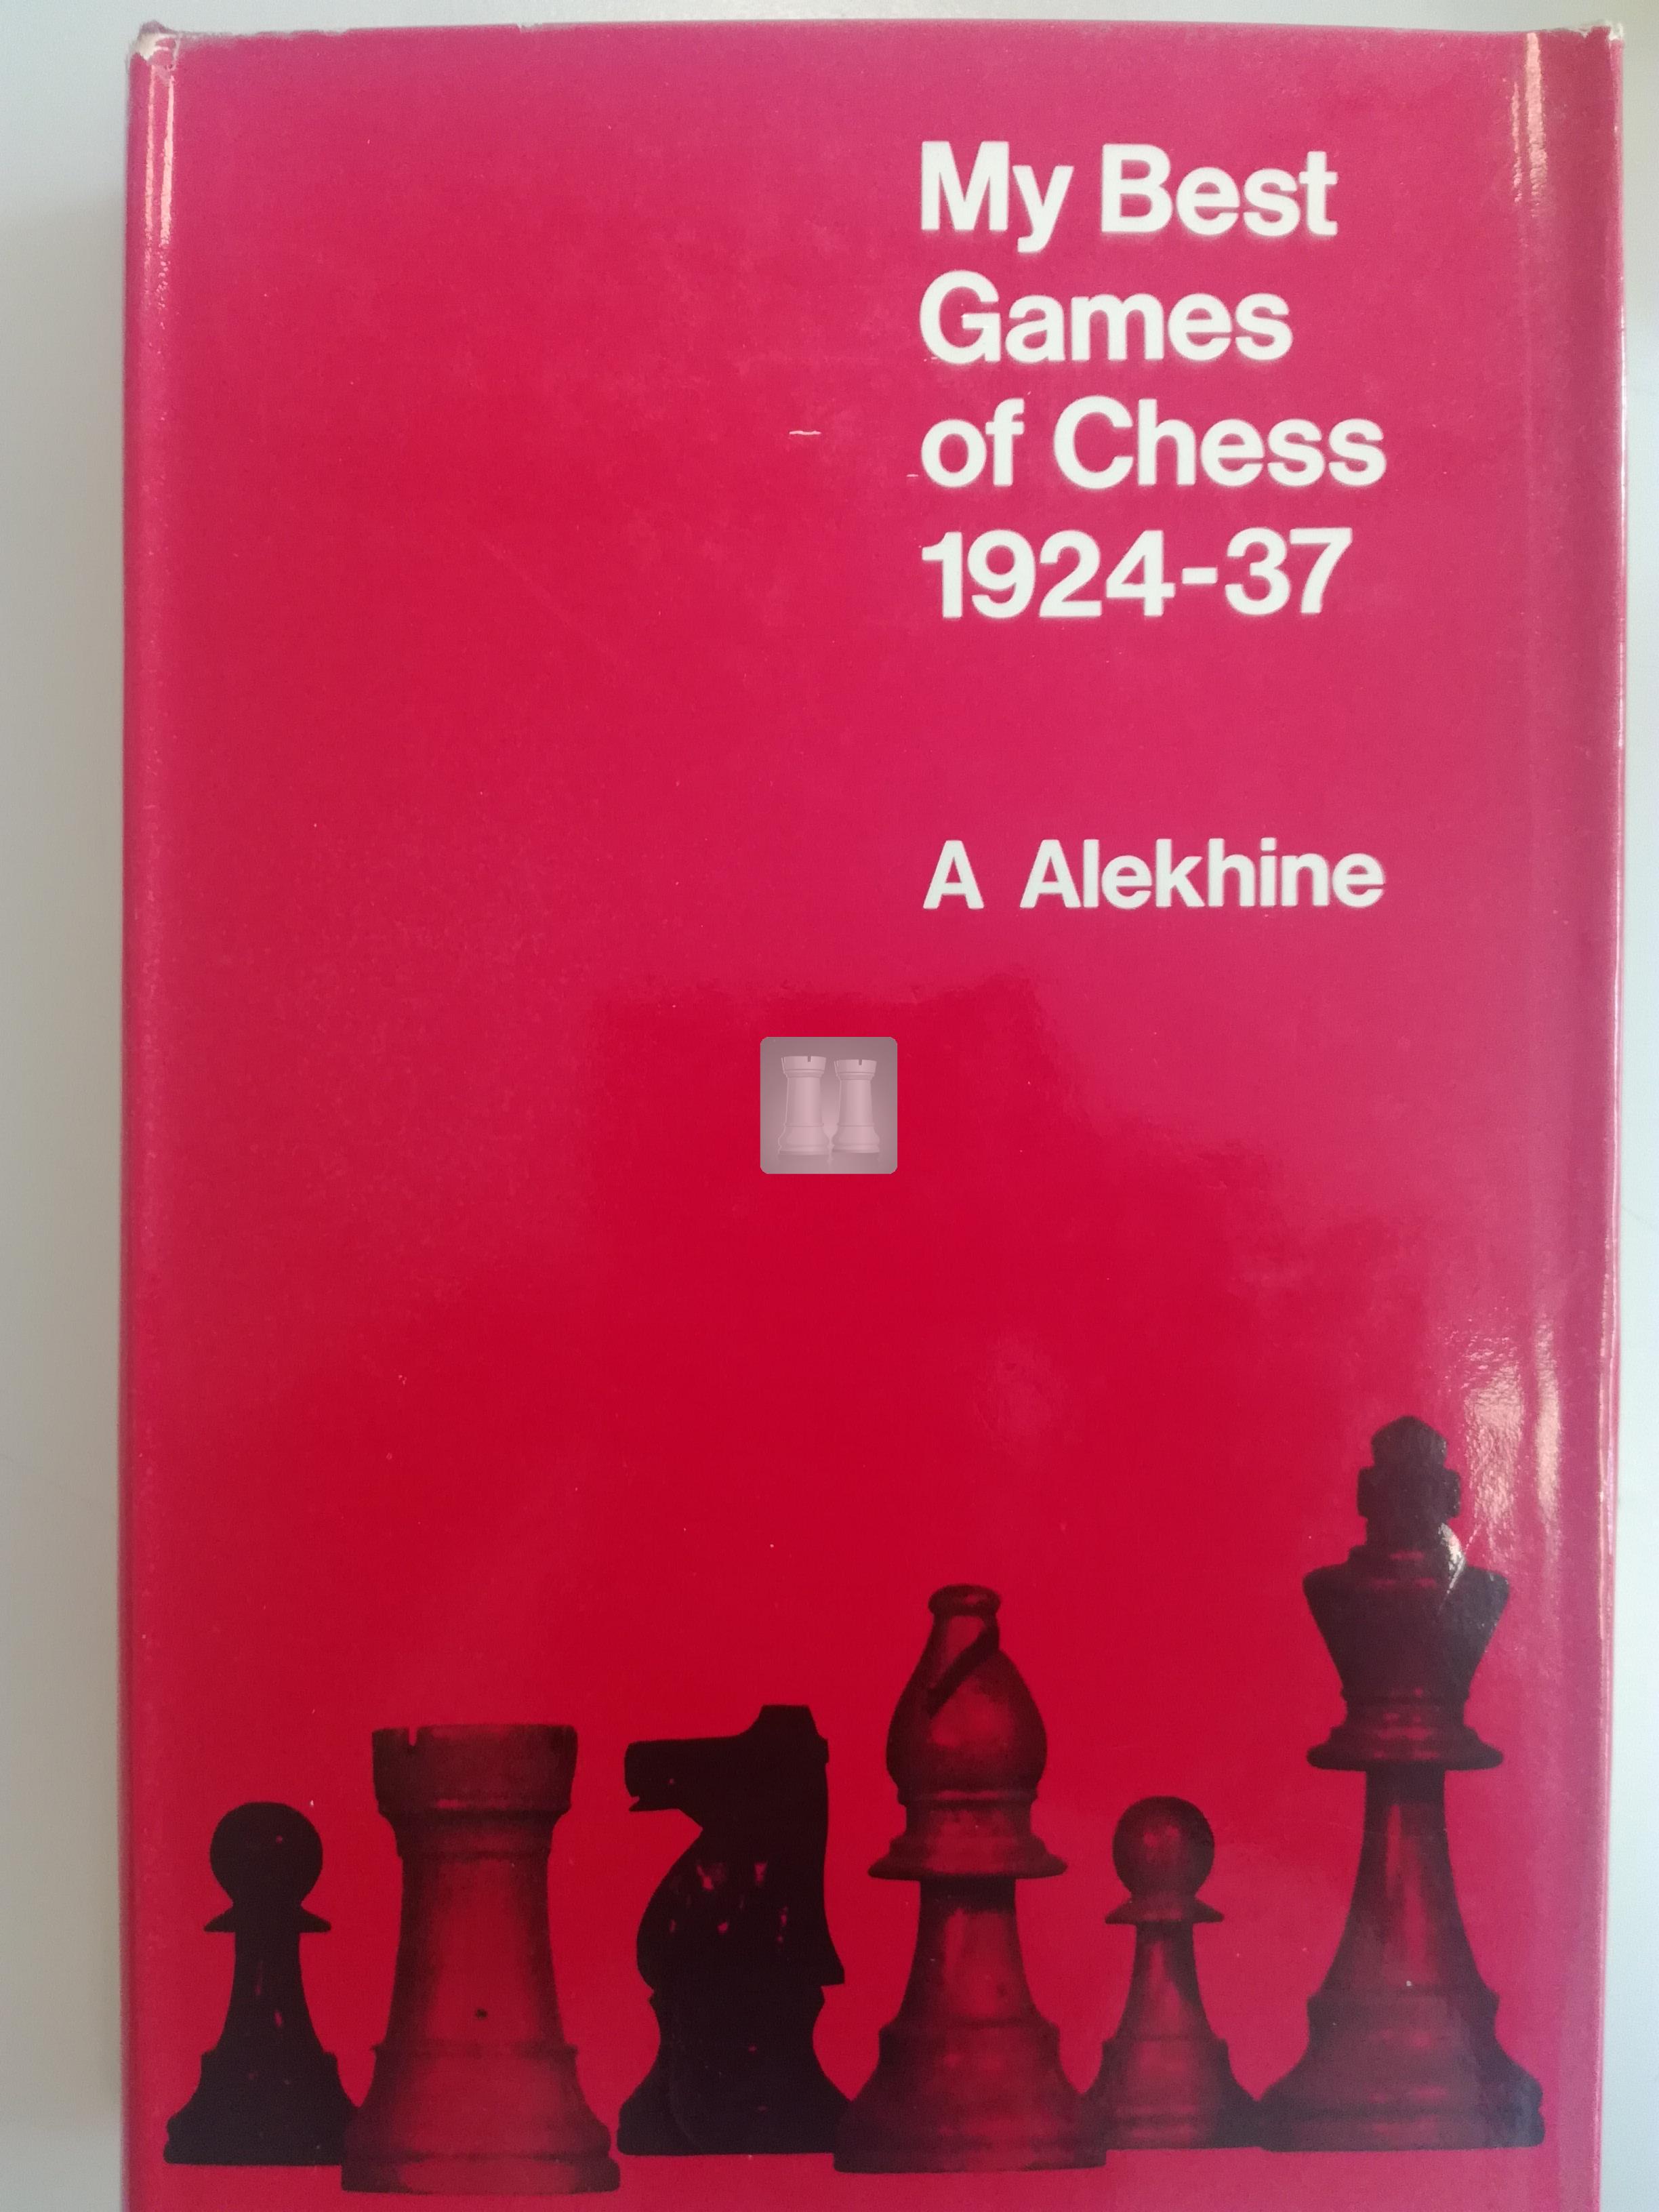 My Best Games of Chess: 1908-1937 - Kindle edition by Alekhine